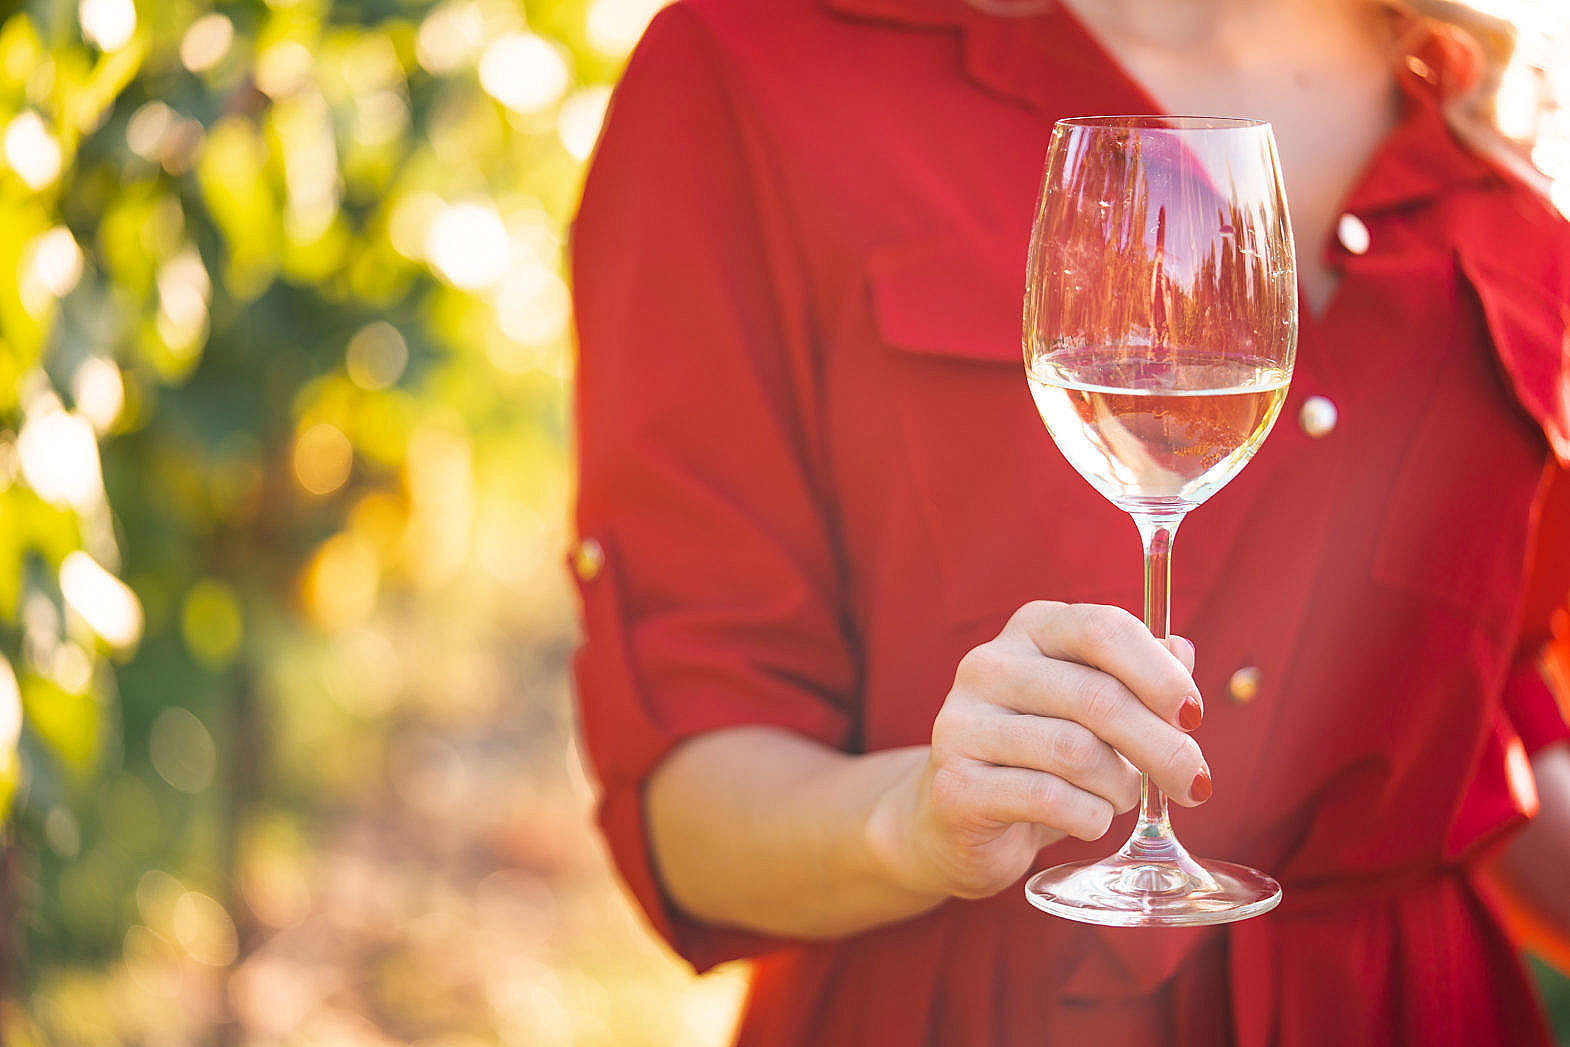 Woman Holding A Glass Of Wine In A Vineyard Free Stock